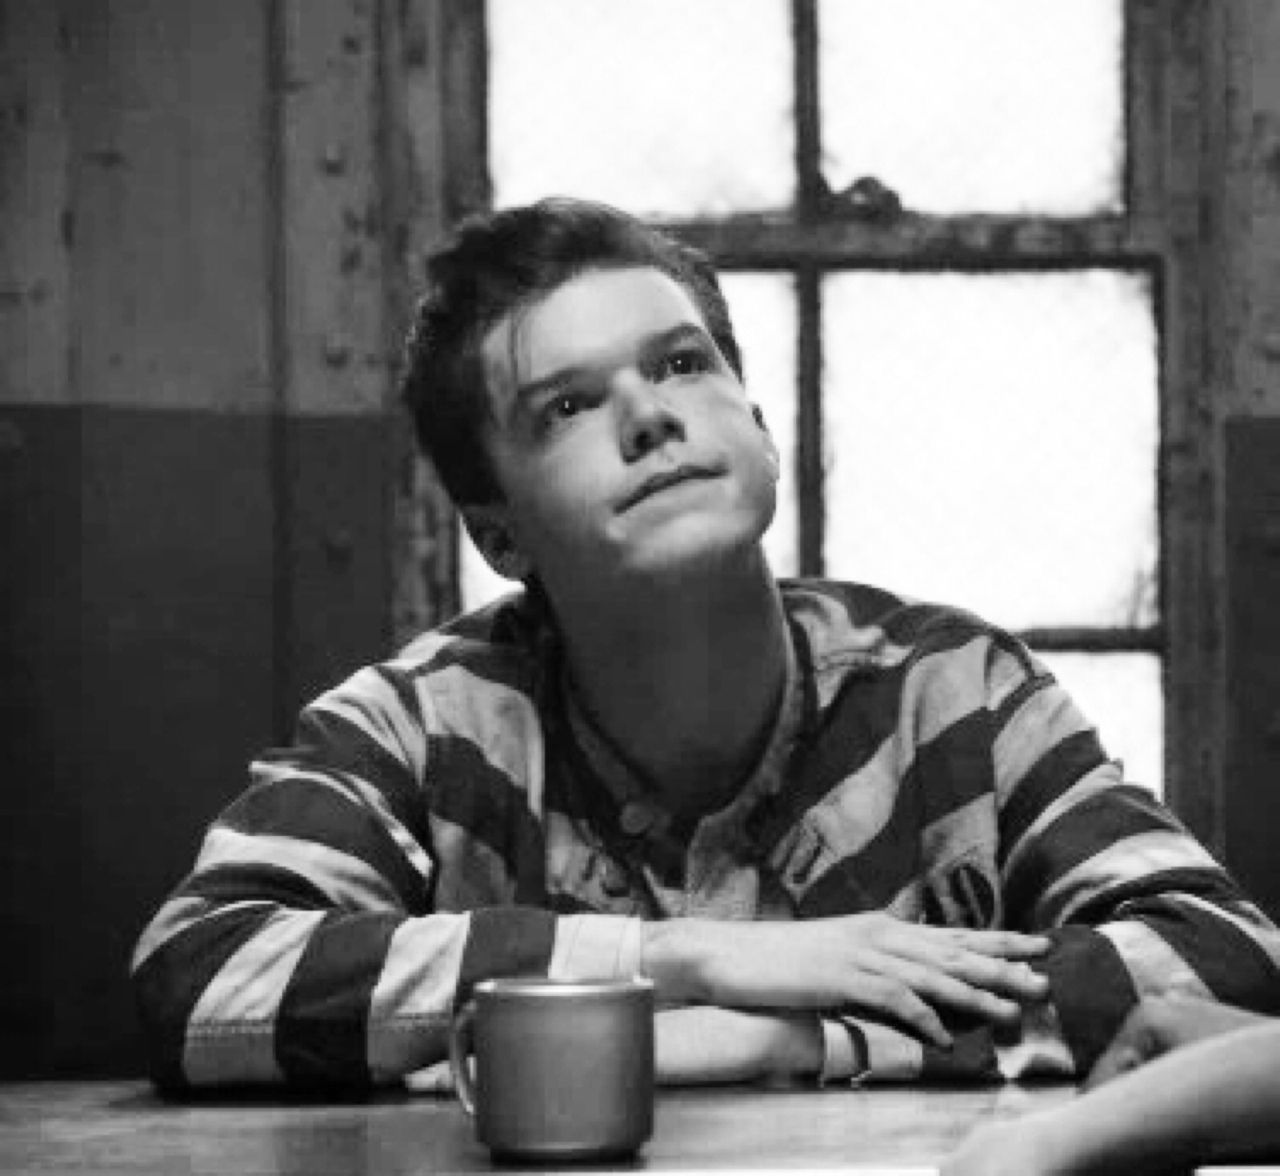 image about Cameron Monaghan. See more about